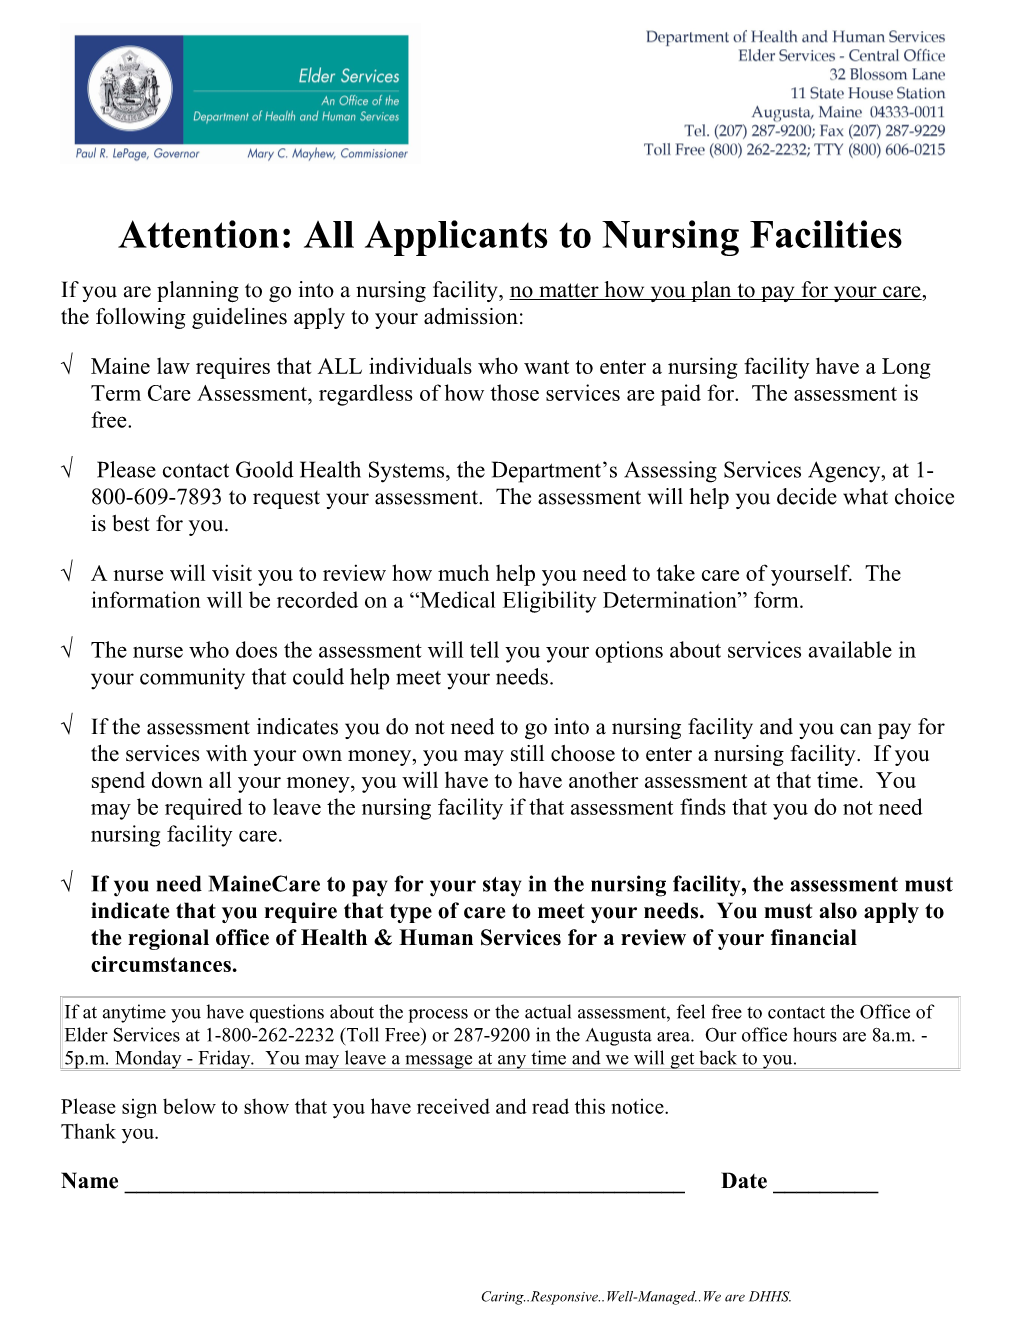 Attention: All Applicants to Nursing Facilities